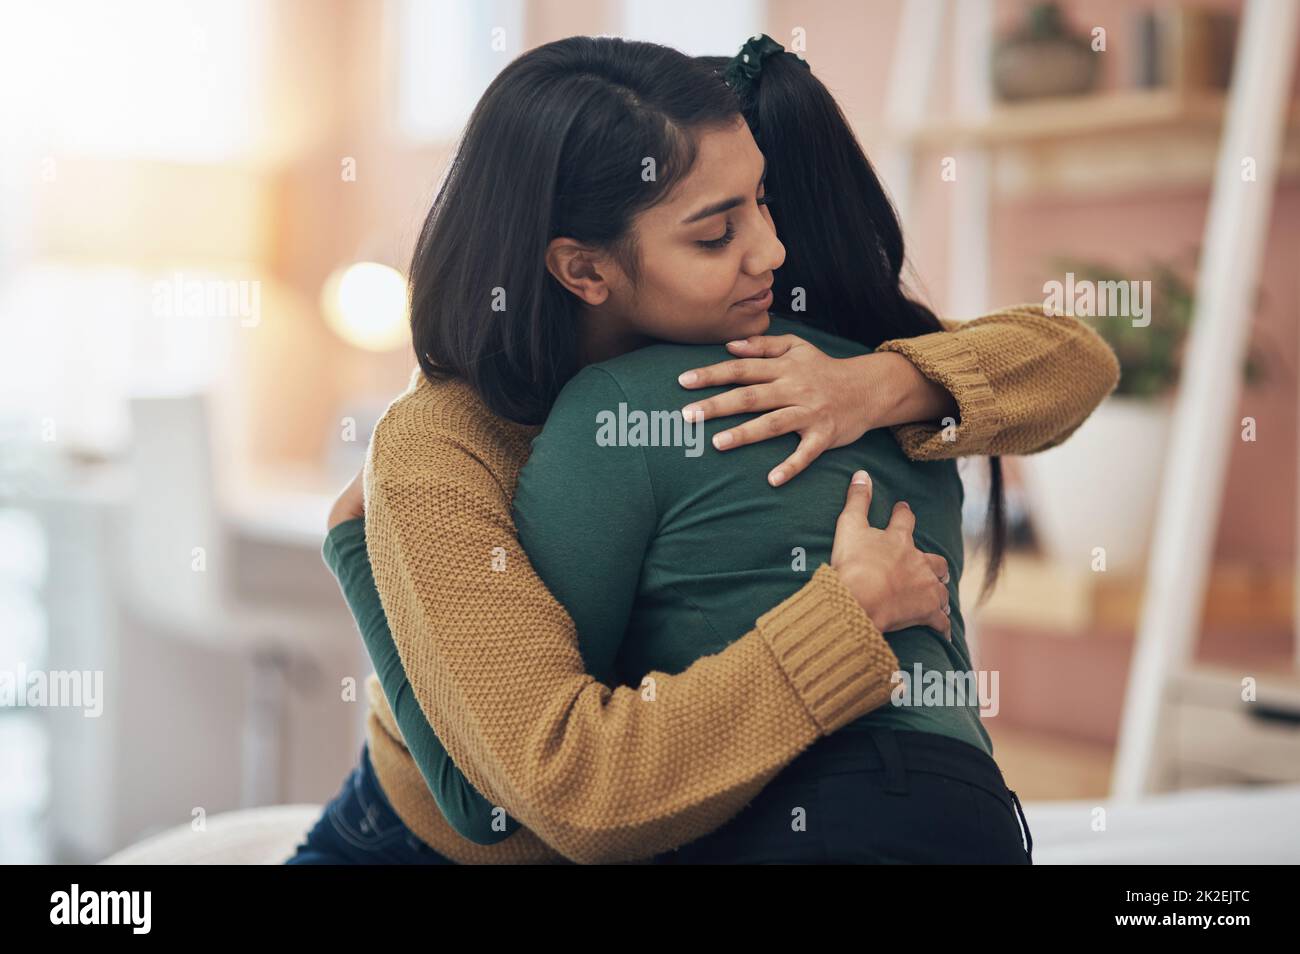 Ill always be here to support her. Cropped shot of two young women embracing each other at home. Stock Photo